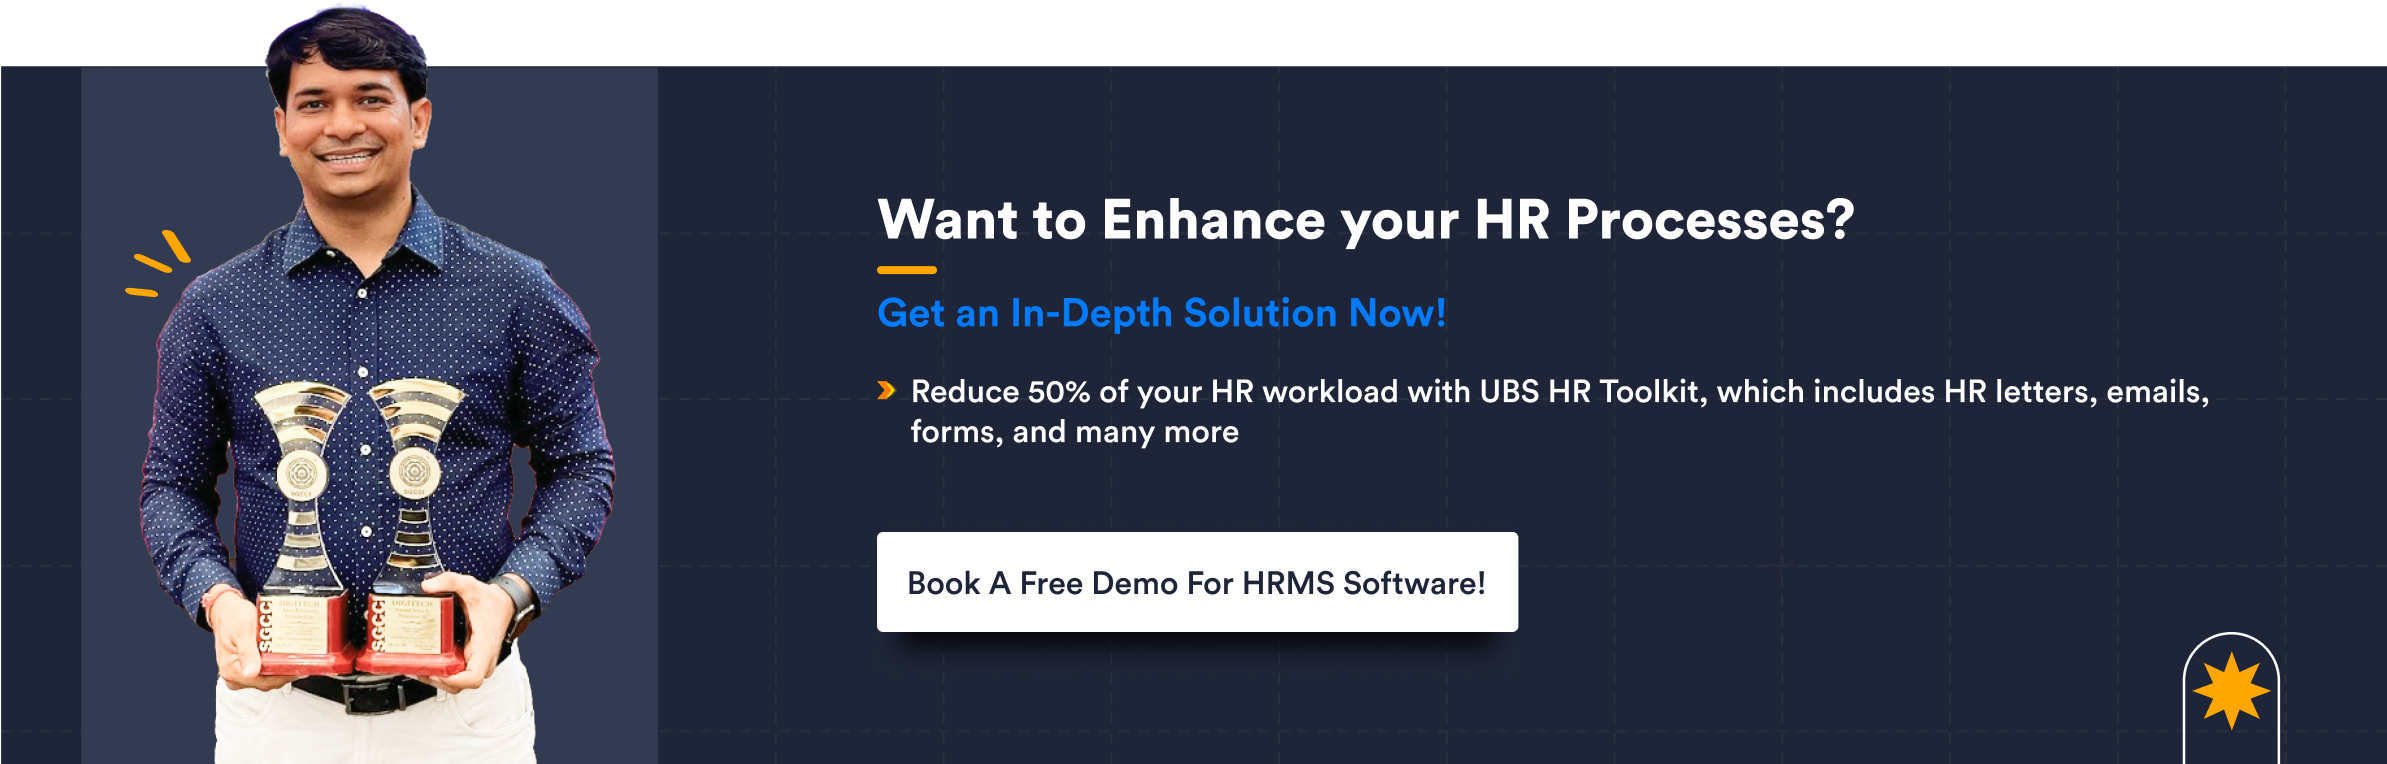 Want to Enhance your HR Processes 1